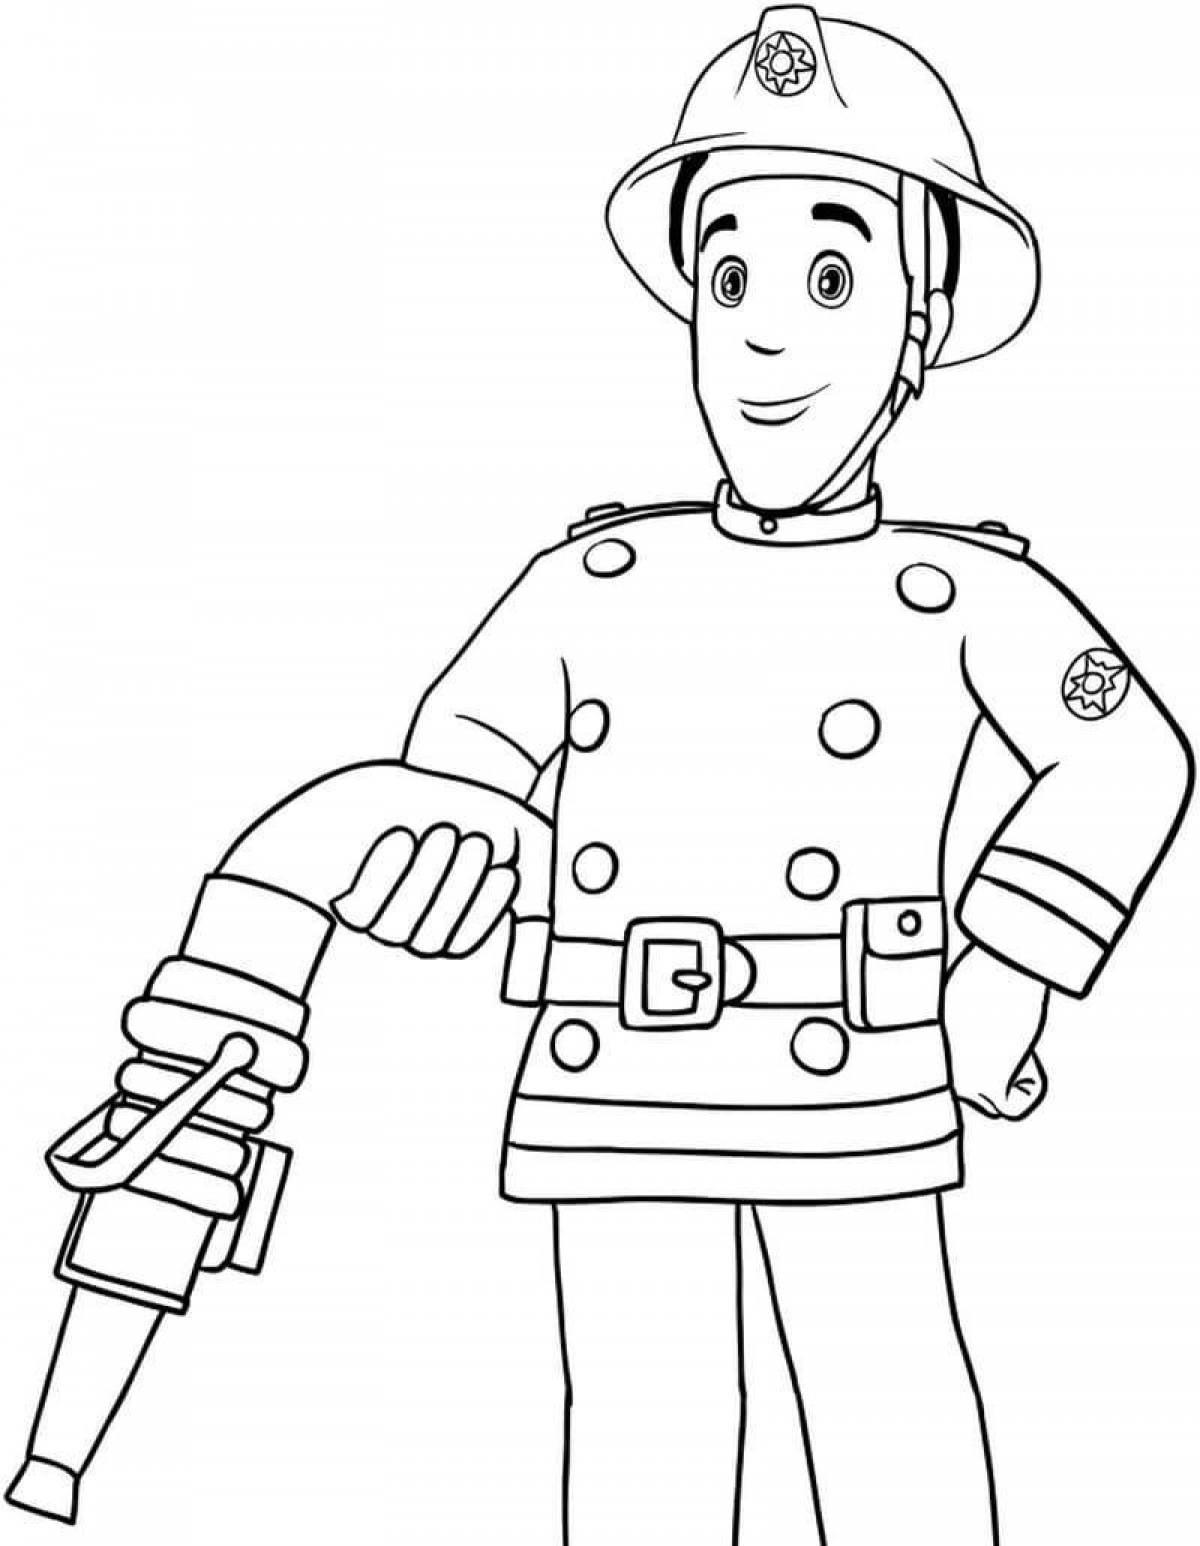 Fireman coloring page